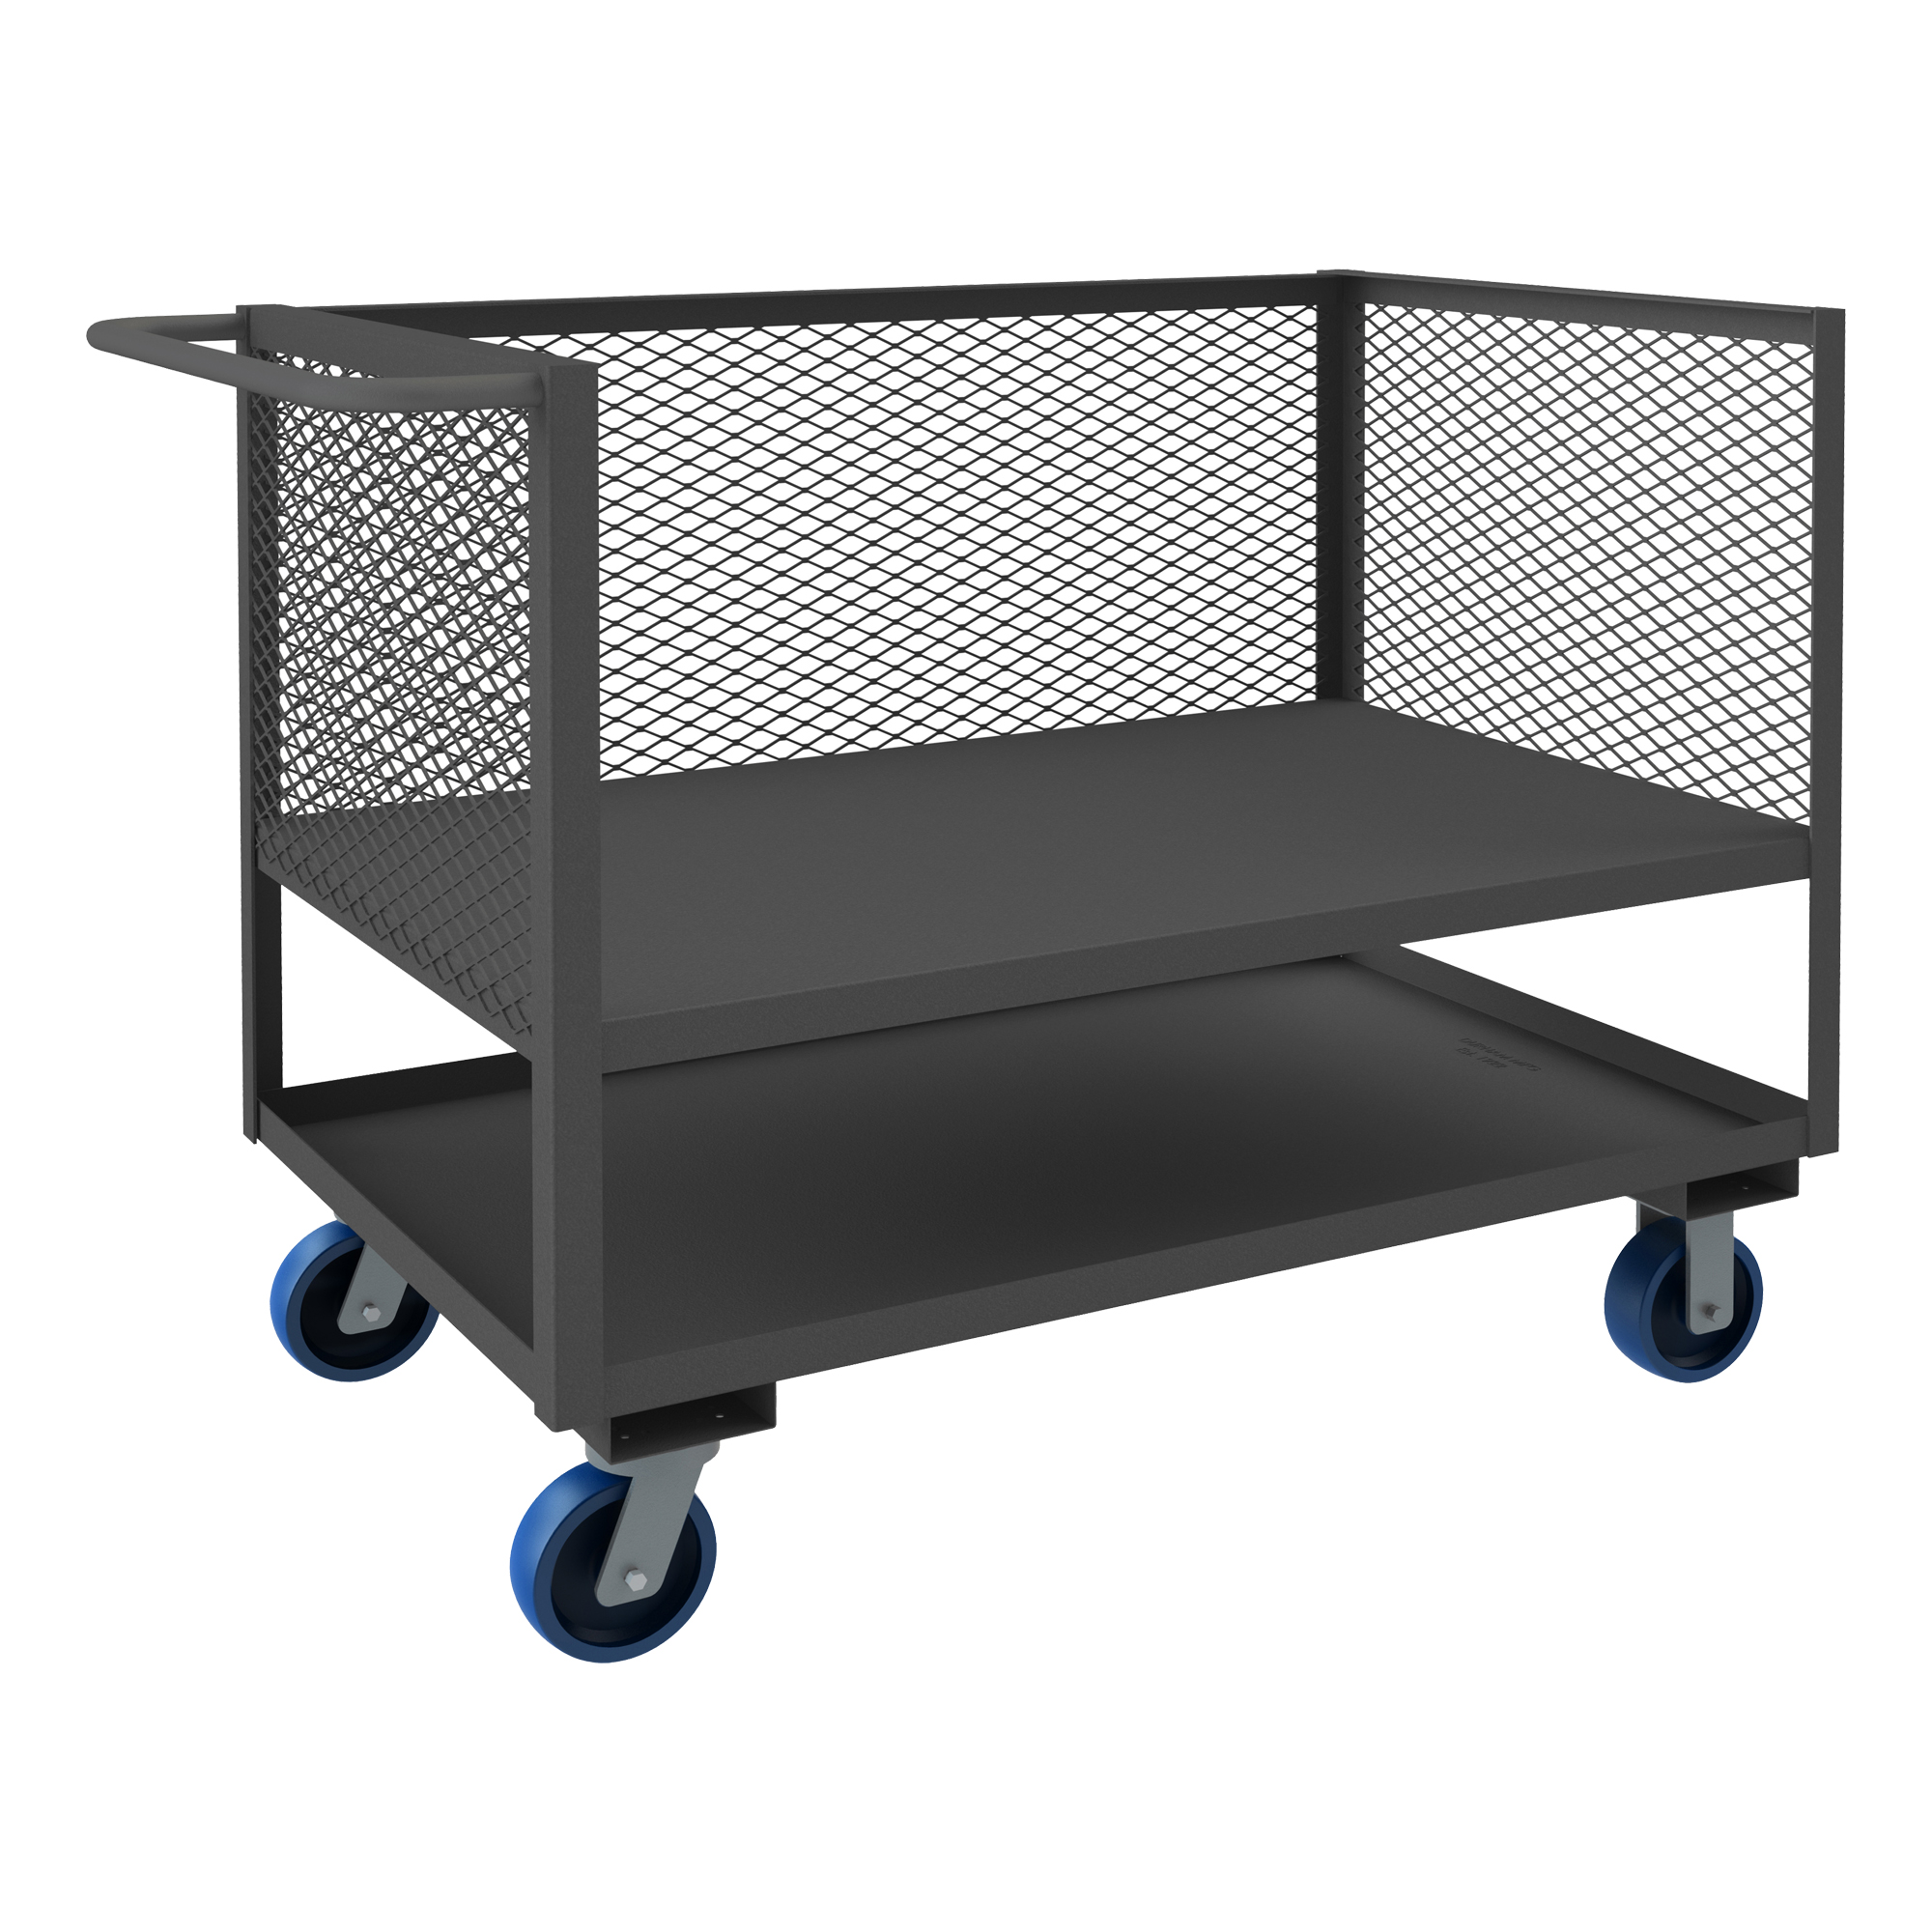 3 Sided Low Deck Truck, Mesh, Capacity 2000 Lbs, Size 30 x 48 Inch